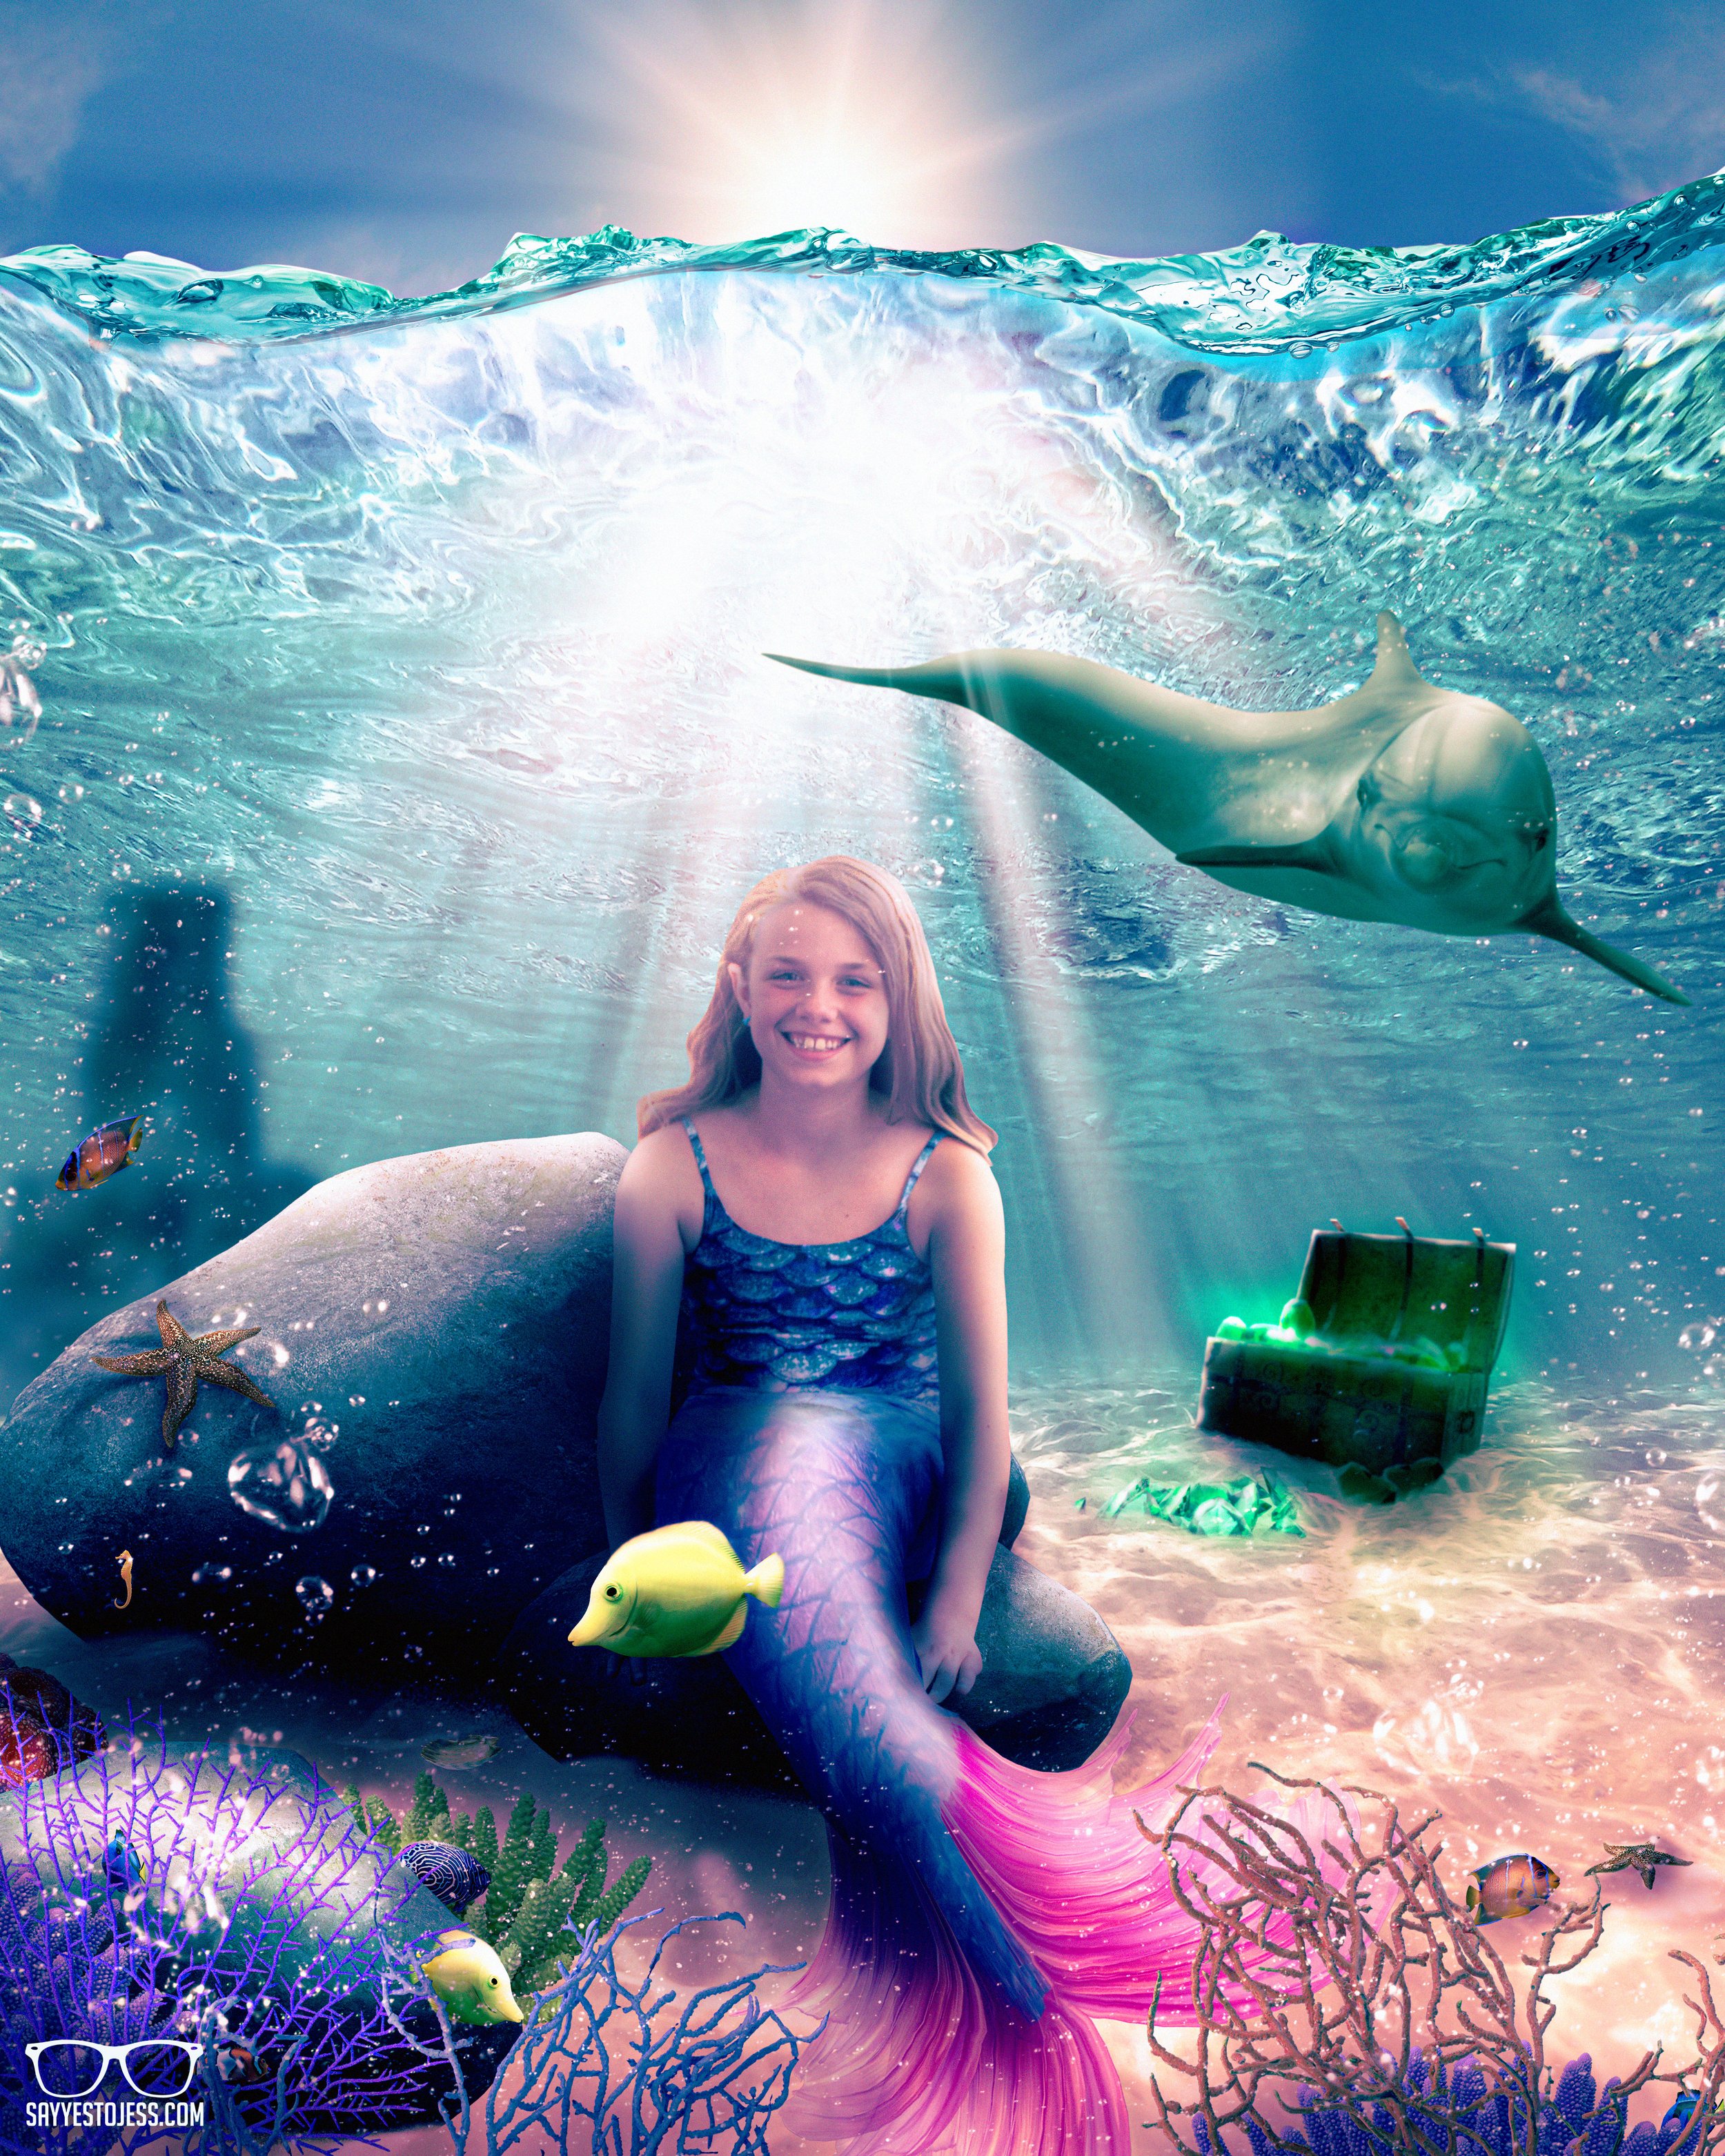 Under the sea! My most recent underwater mermaid photoshoot! — Say